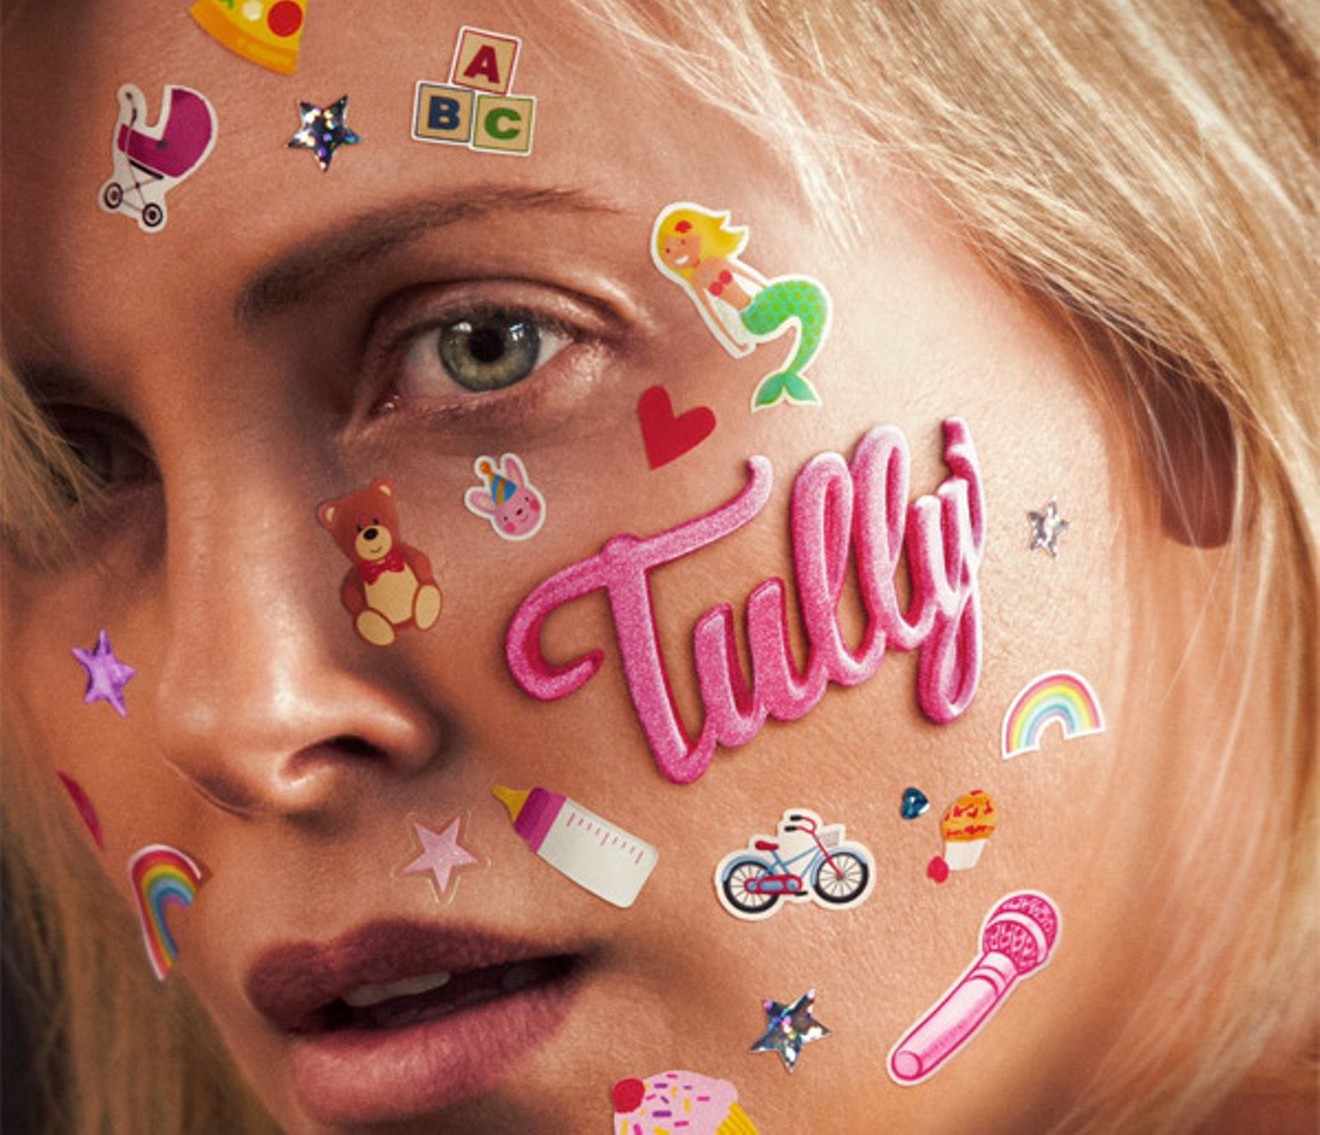 Tully is one of several must-see movies at this year's Phoenix Film Festival.